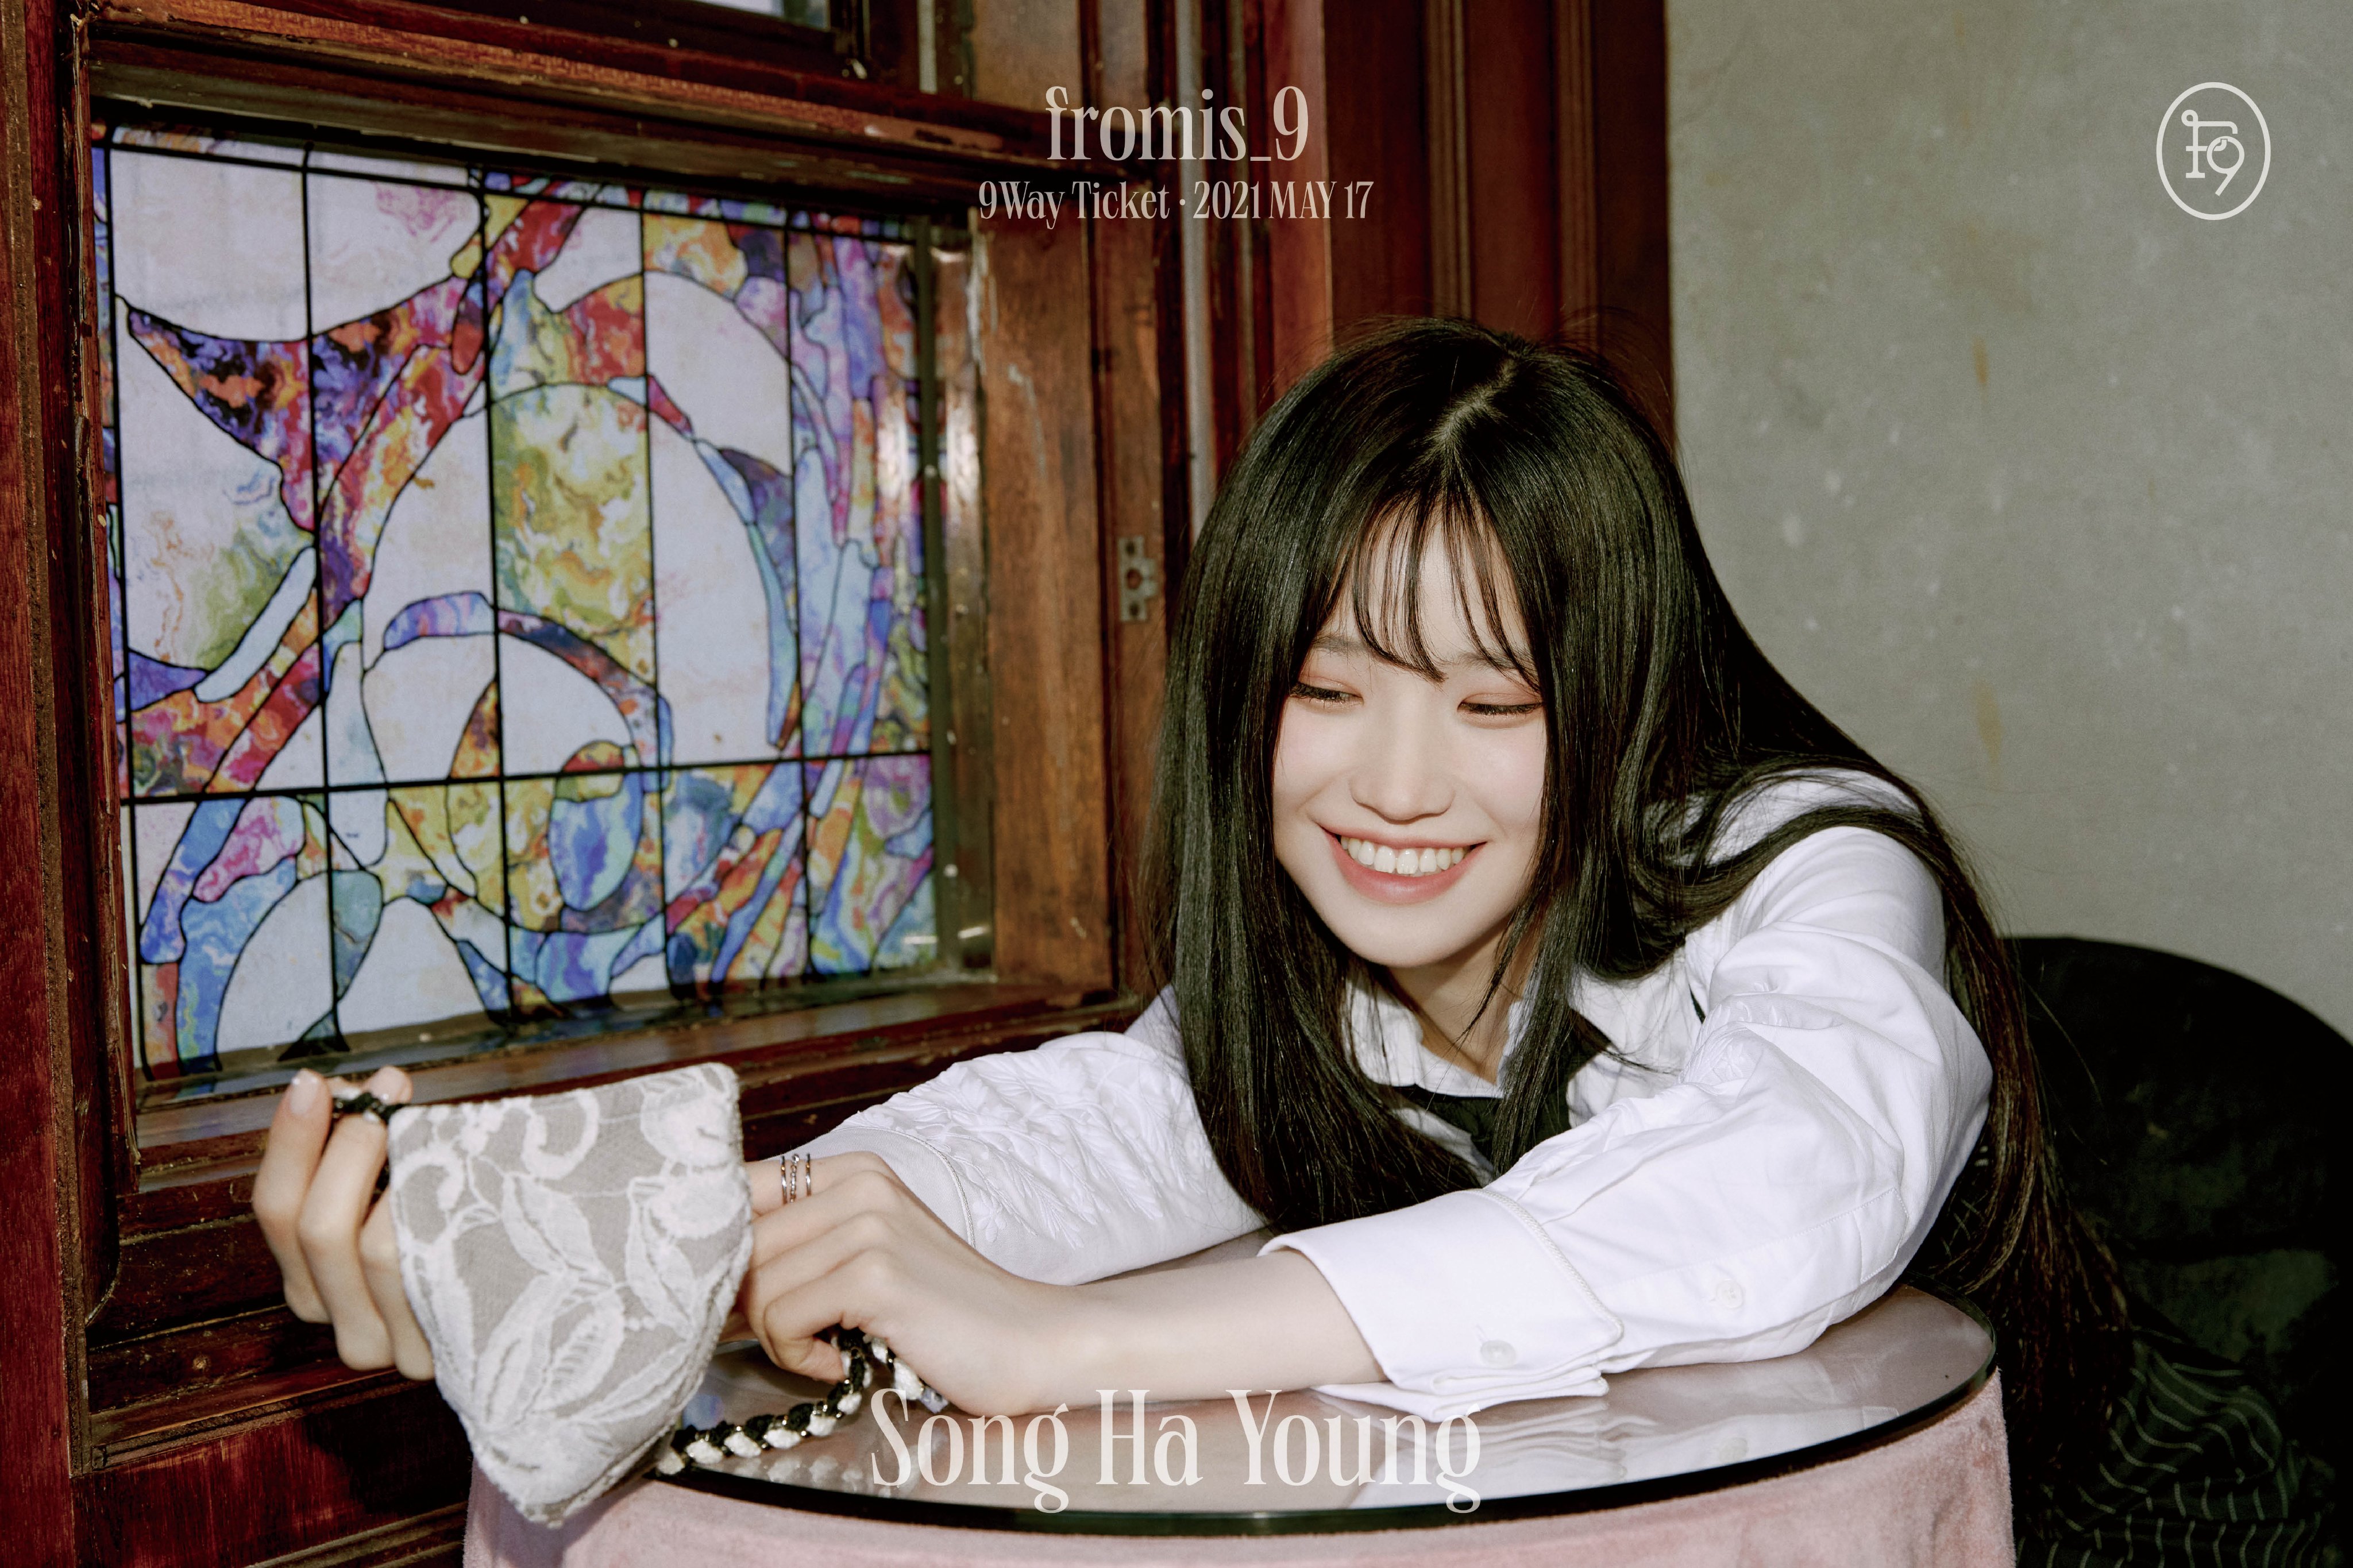 Song Hayoung fromis_9 9 Way Teaser - Ticket to Seoul